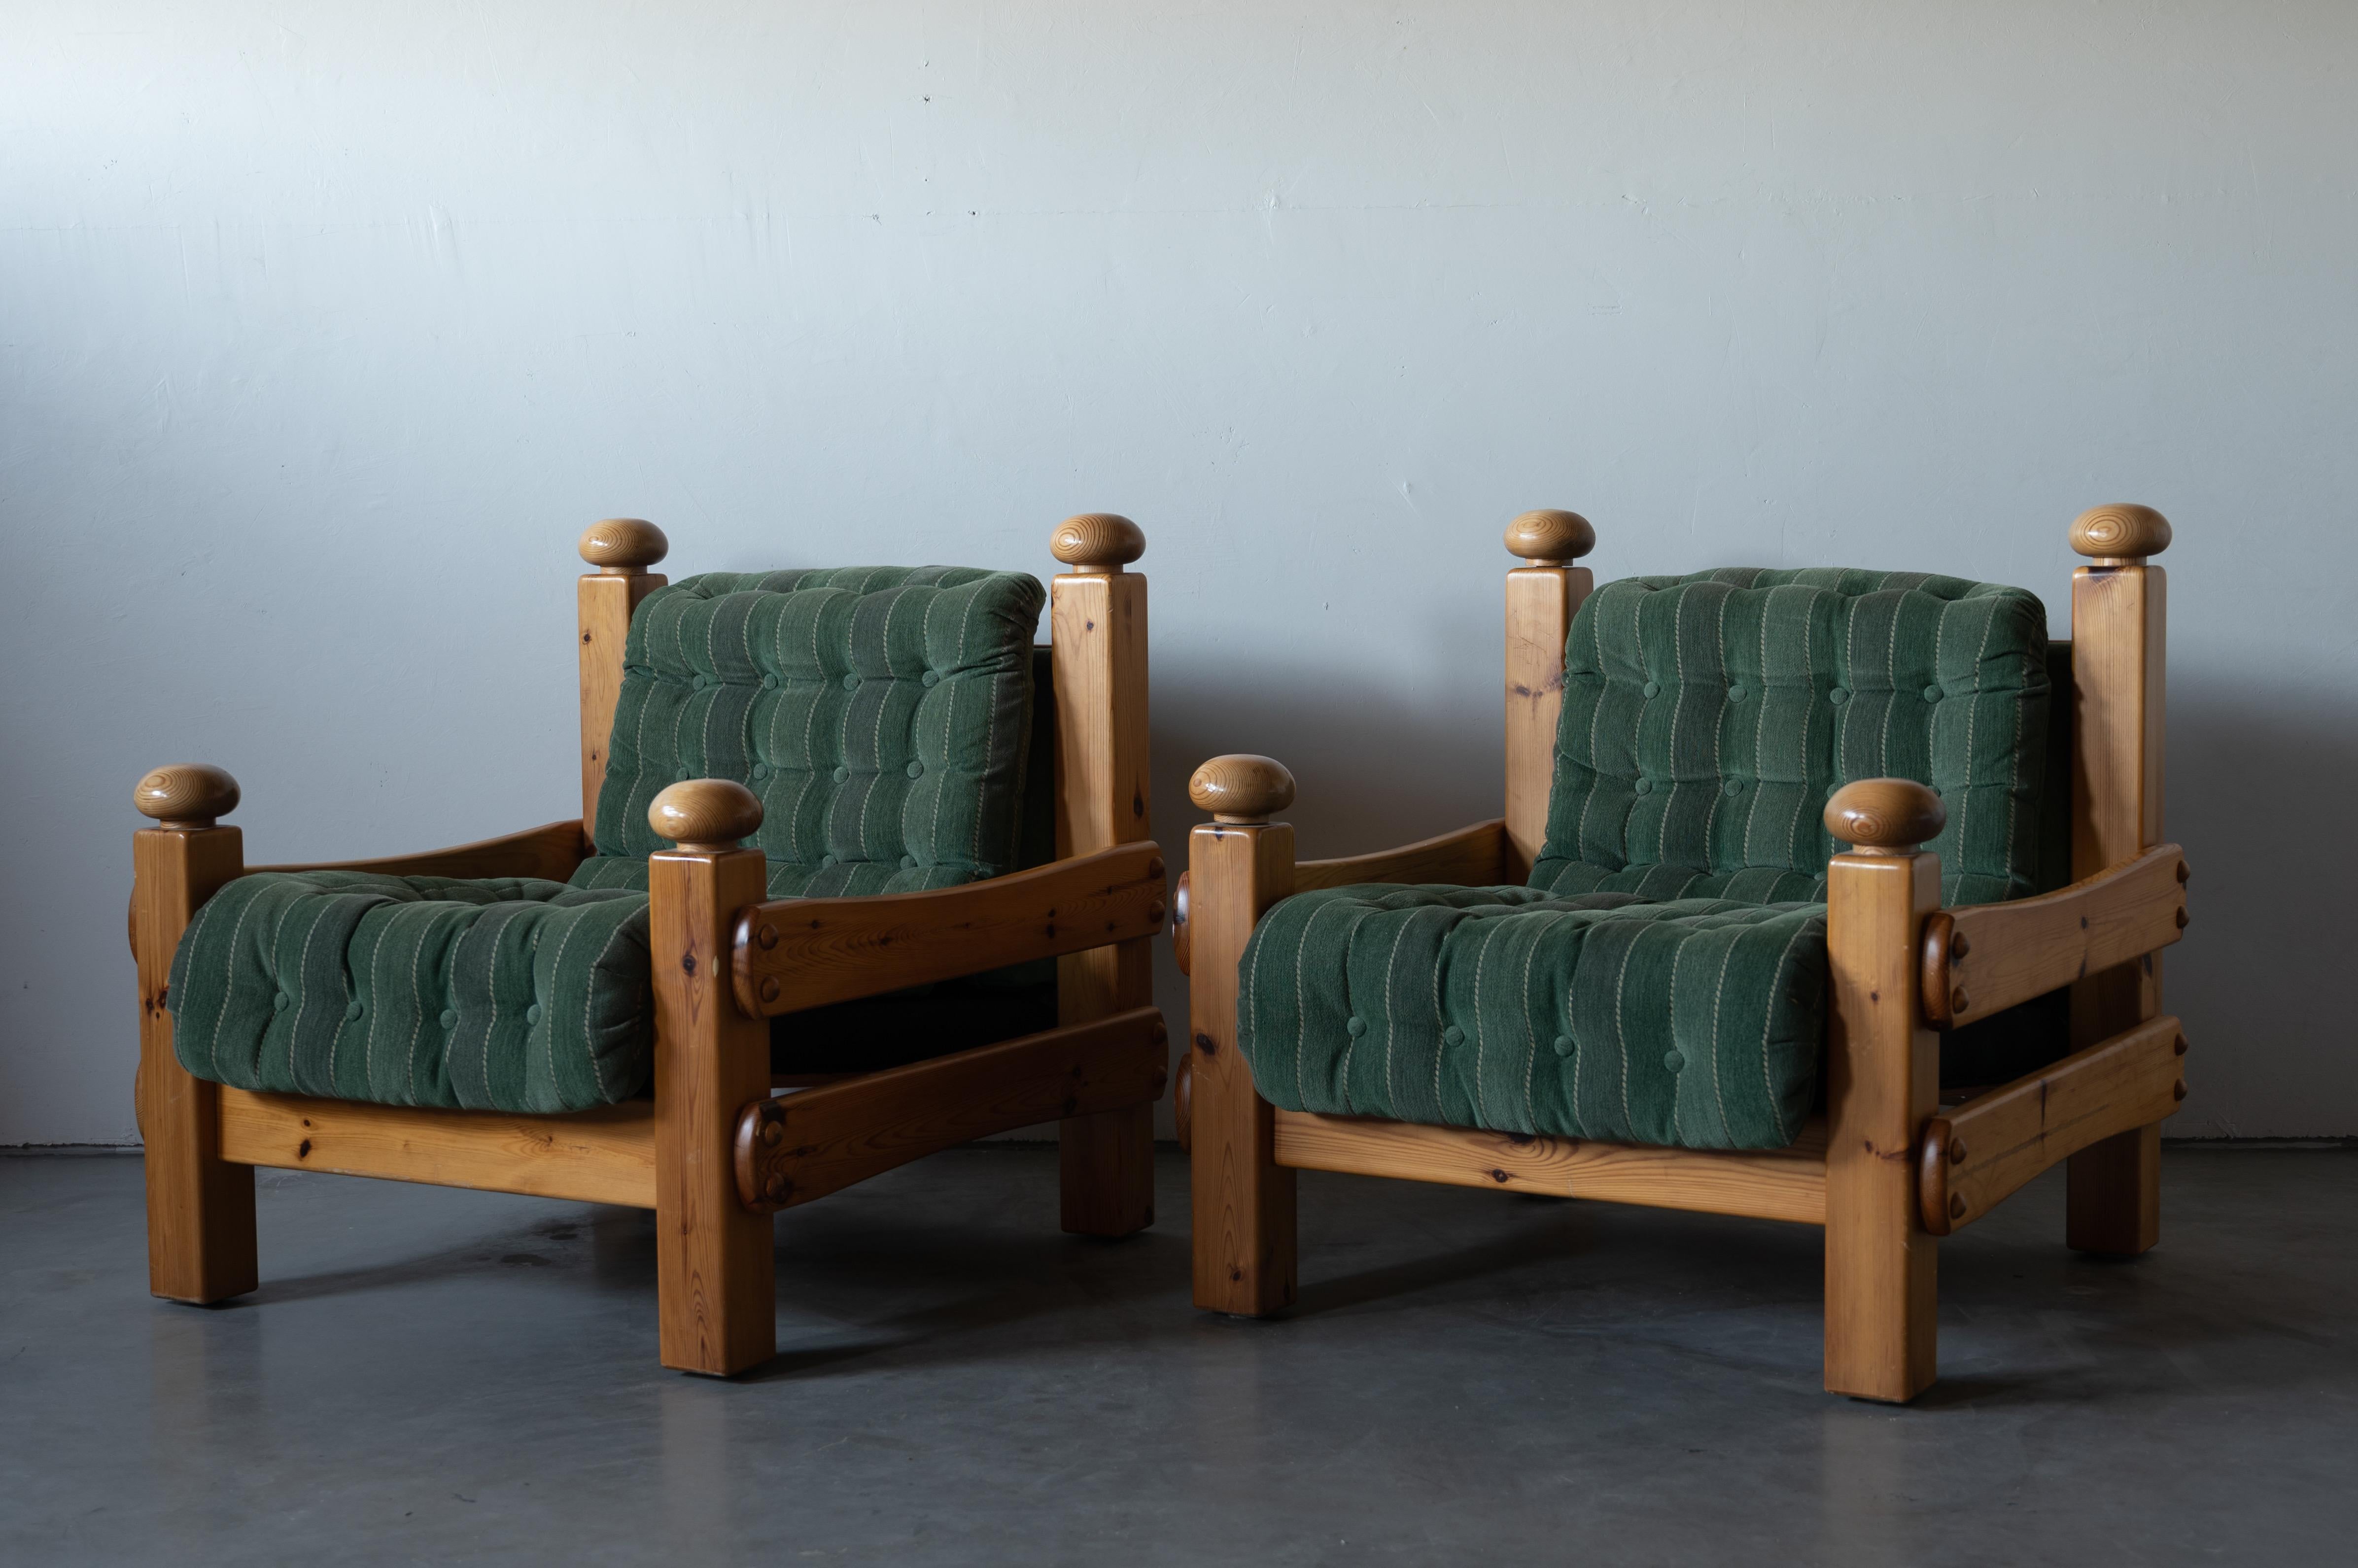 Swedish Designer, Lounge Chairs, Solid Pine, Green Fabric, Sweden, 1970s For Sale 1